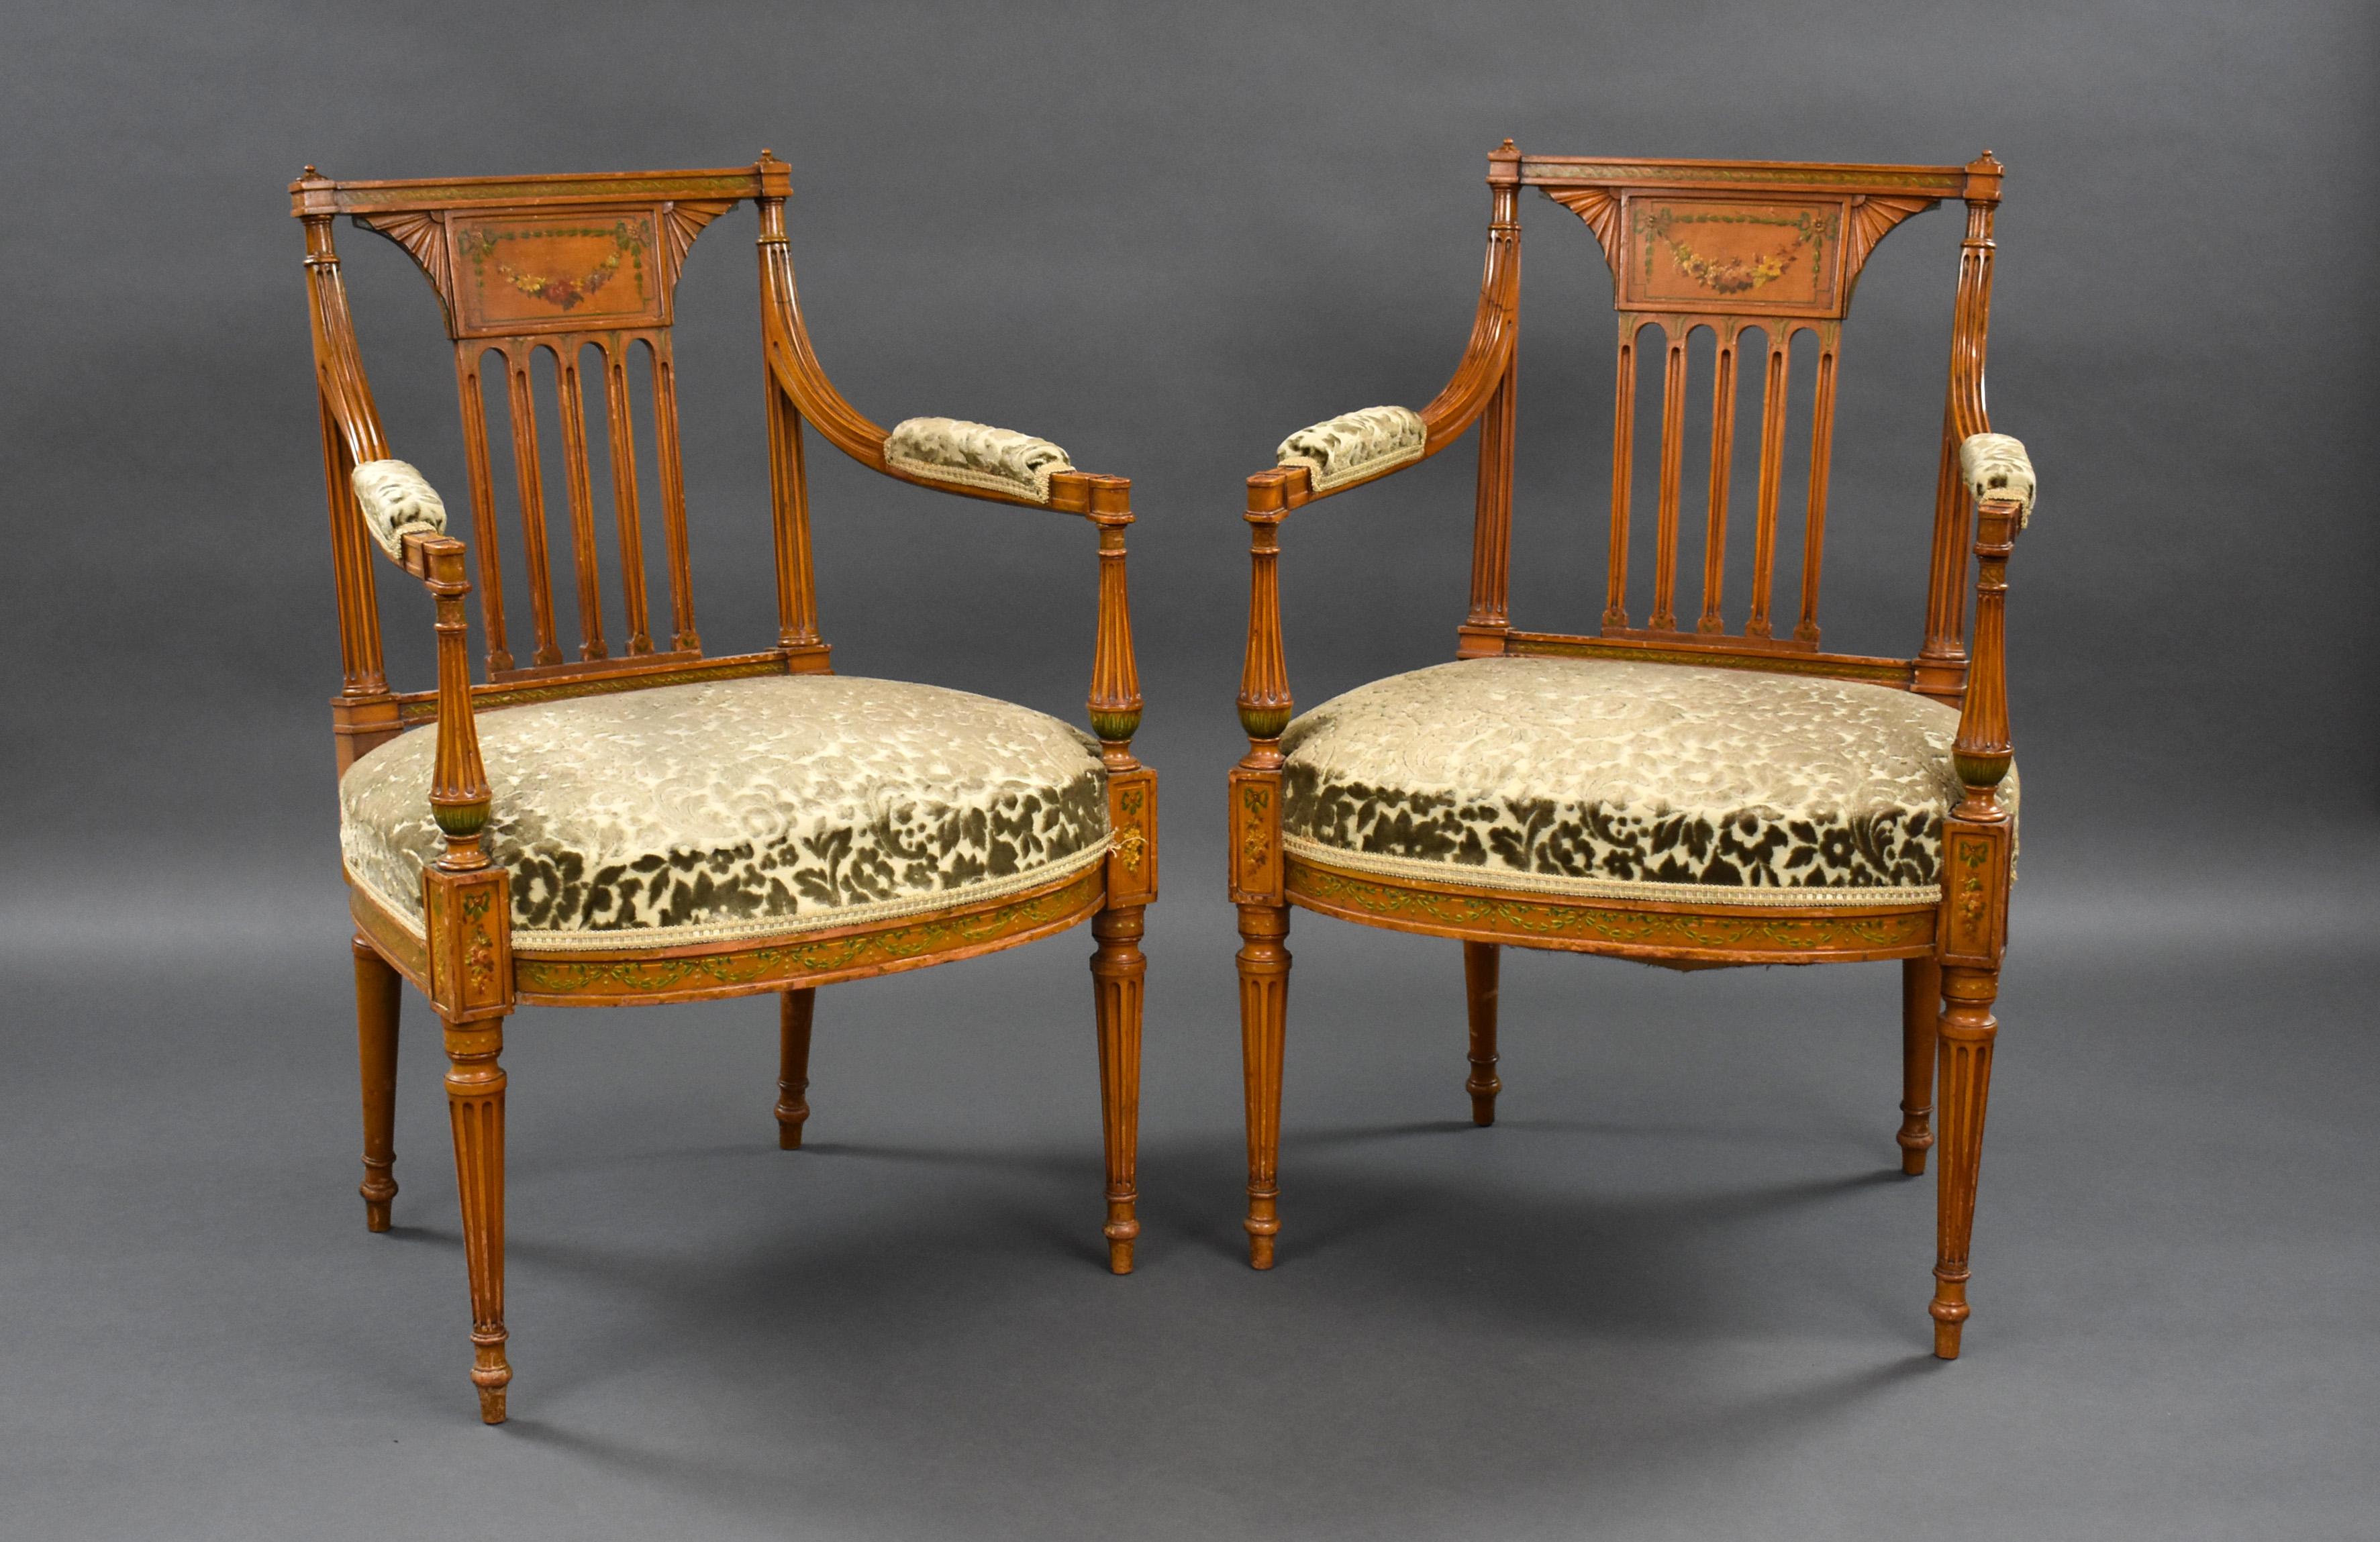 For sale is a good quality Pair of Edwardian Satinwood hand painted armchairs. Each chair has a tablet back and stuff over seat standing on fluted legs both chairs are in very good condition for their age. 

Width: 60cm Depth: 46cm Height: 88cm